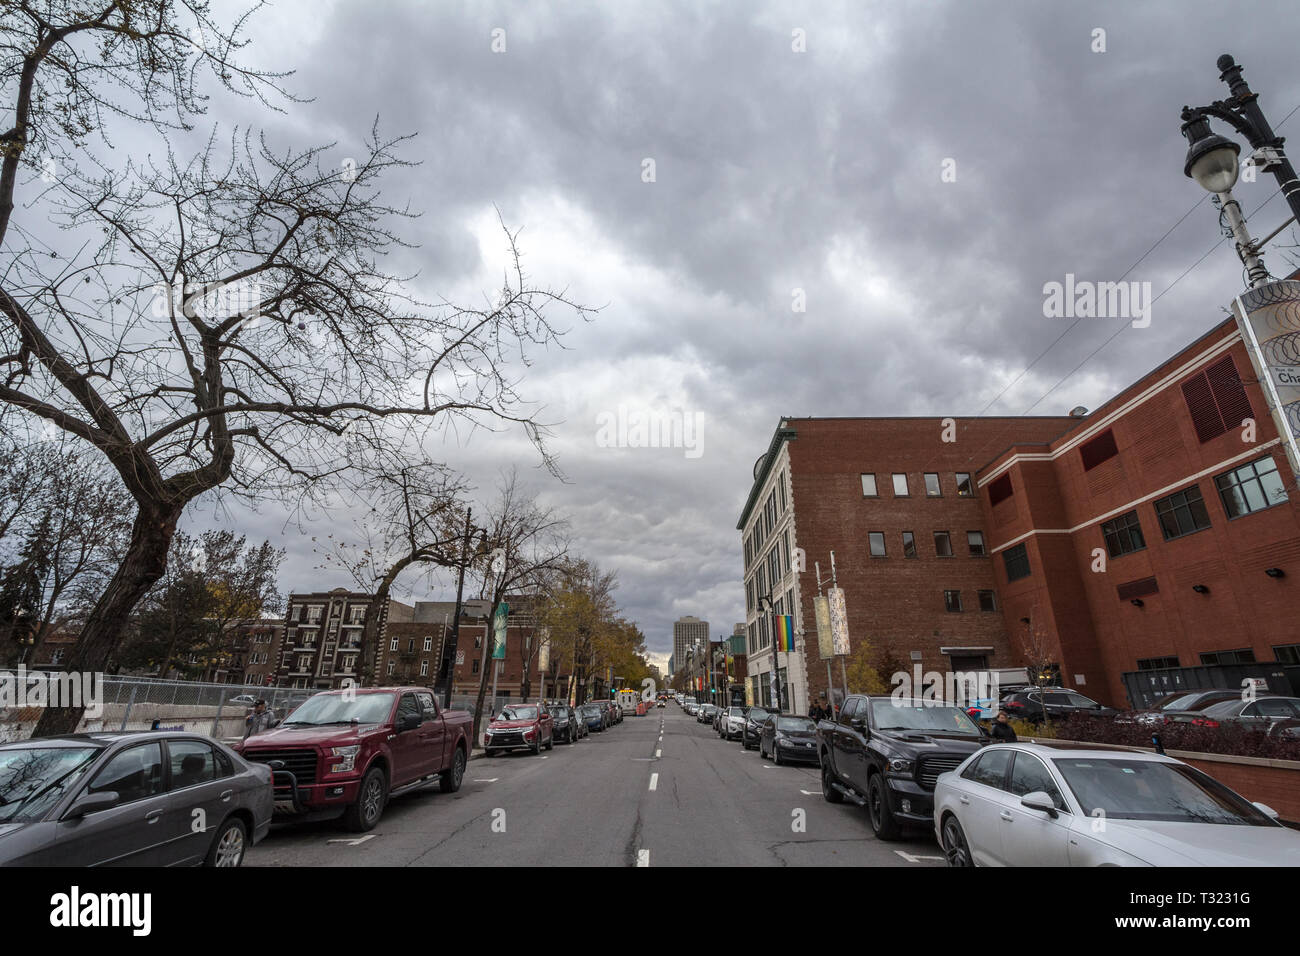 MONTREAL, CANADA - NOVEMBER 8, 2018: Cars parked in a residential street with cars parked in le Village, Montreal, Quebec. A typical North American di Stock Photo